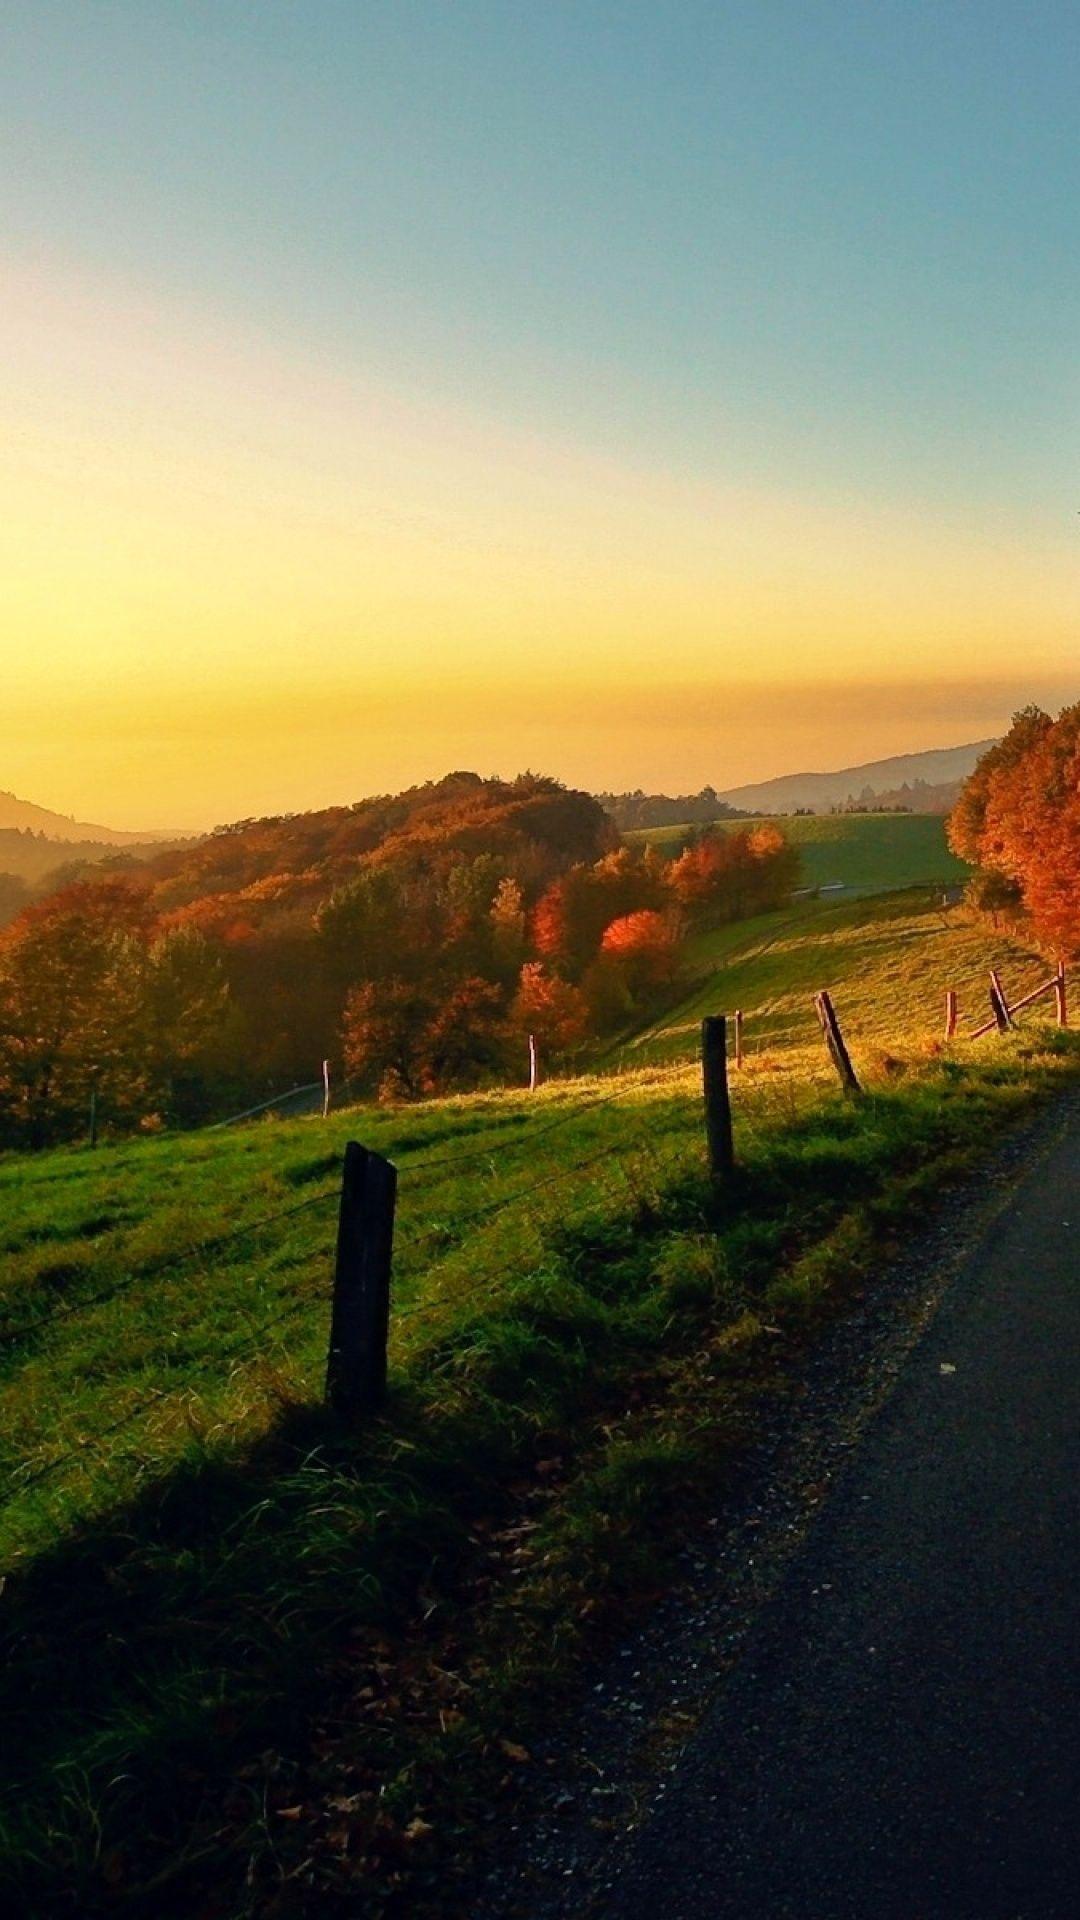 Countryside Autumn Landscape Android Wallpaper. Countryside wallpaper, Autumn landscape, Landscape wallpaper